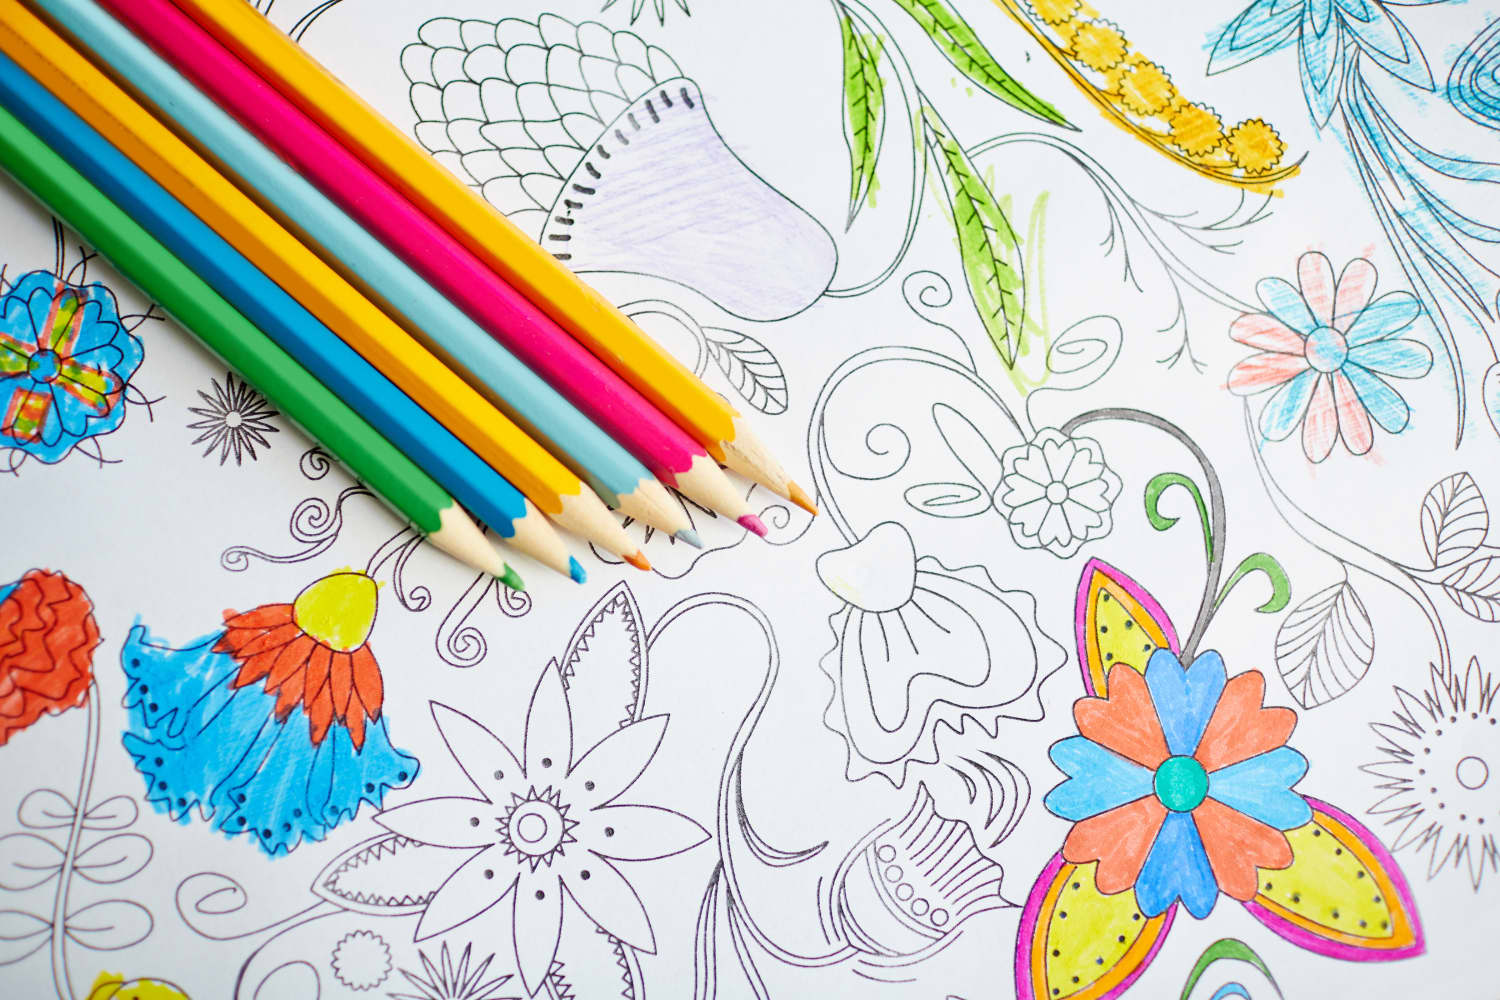 117 Museums Have Made Thousands of Coloring Book Pages Free To Download